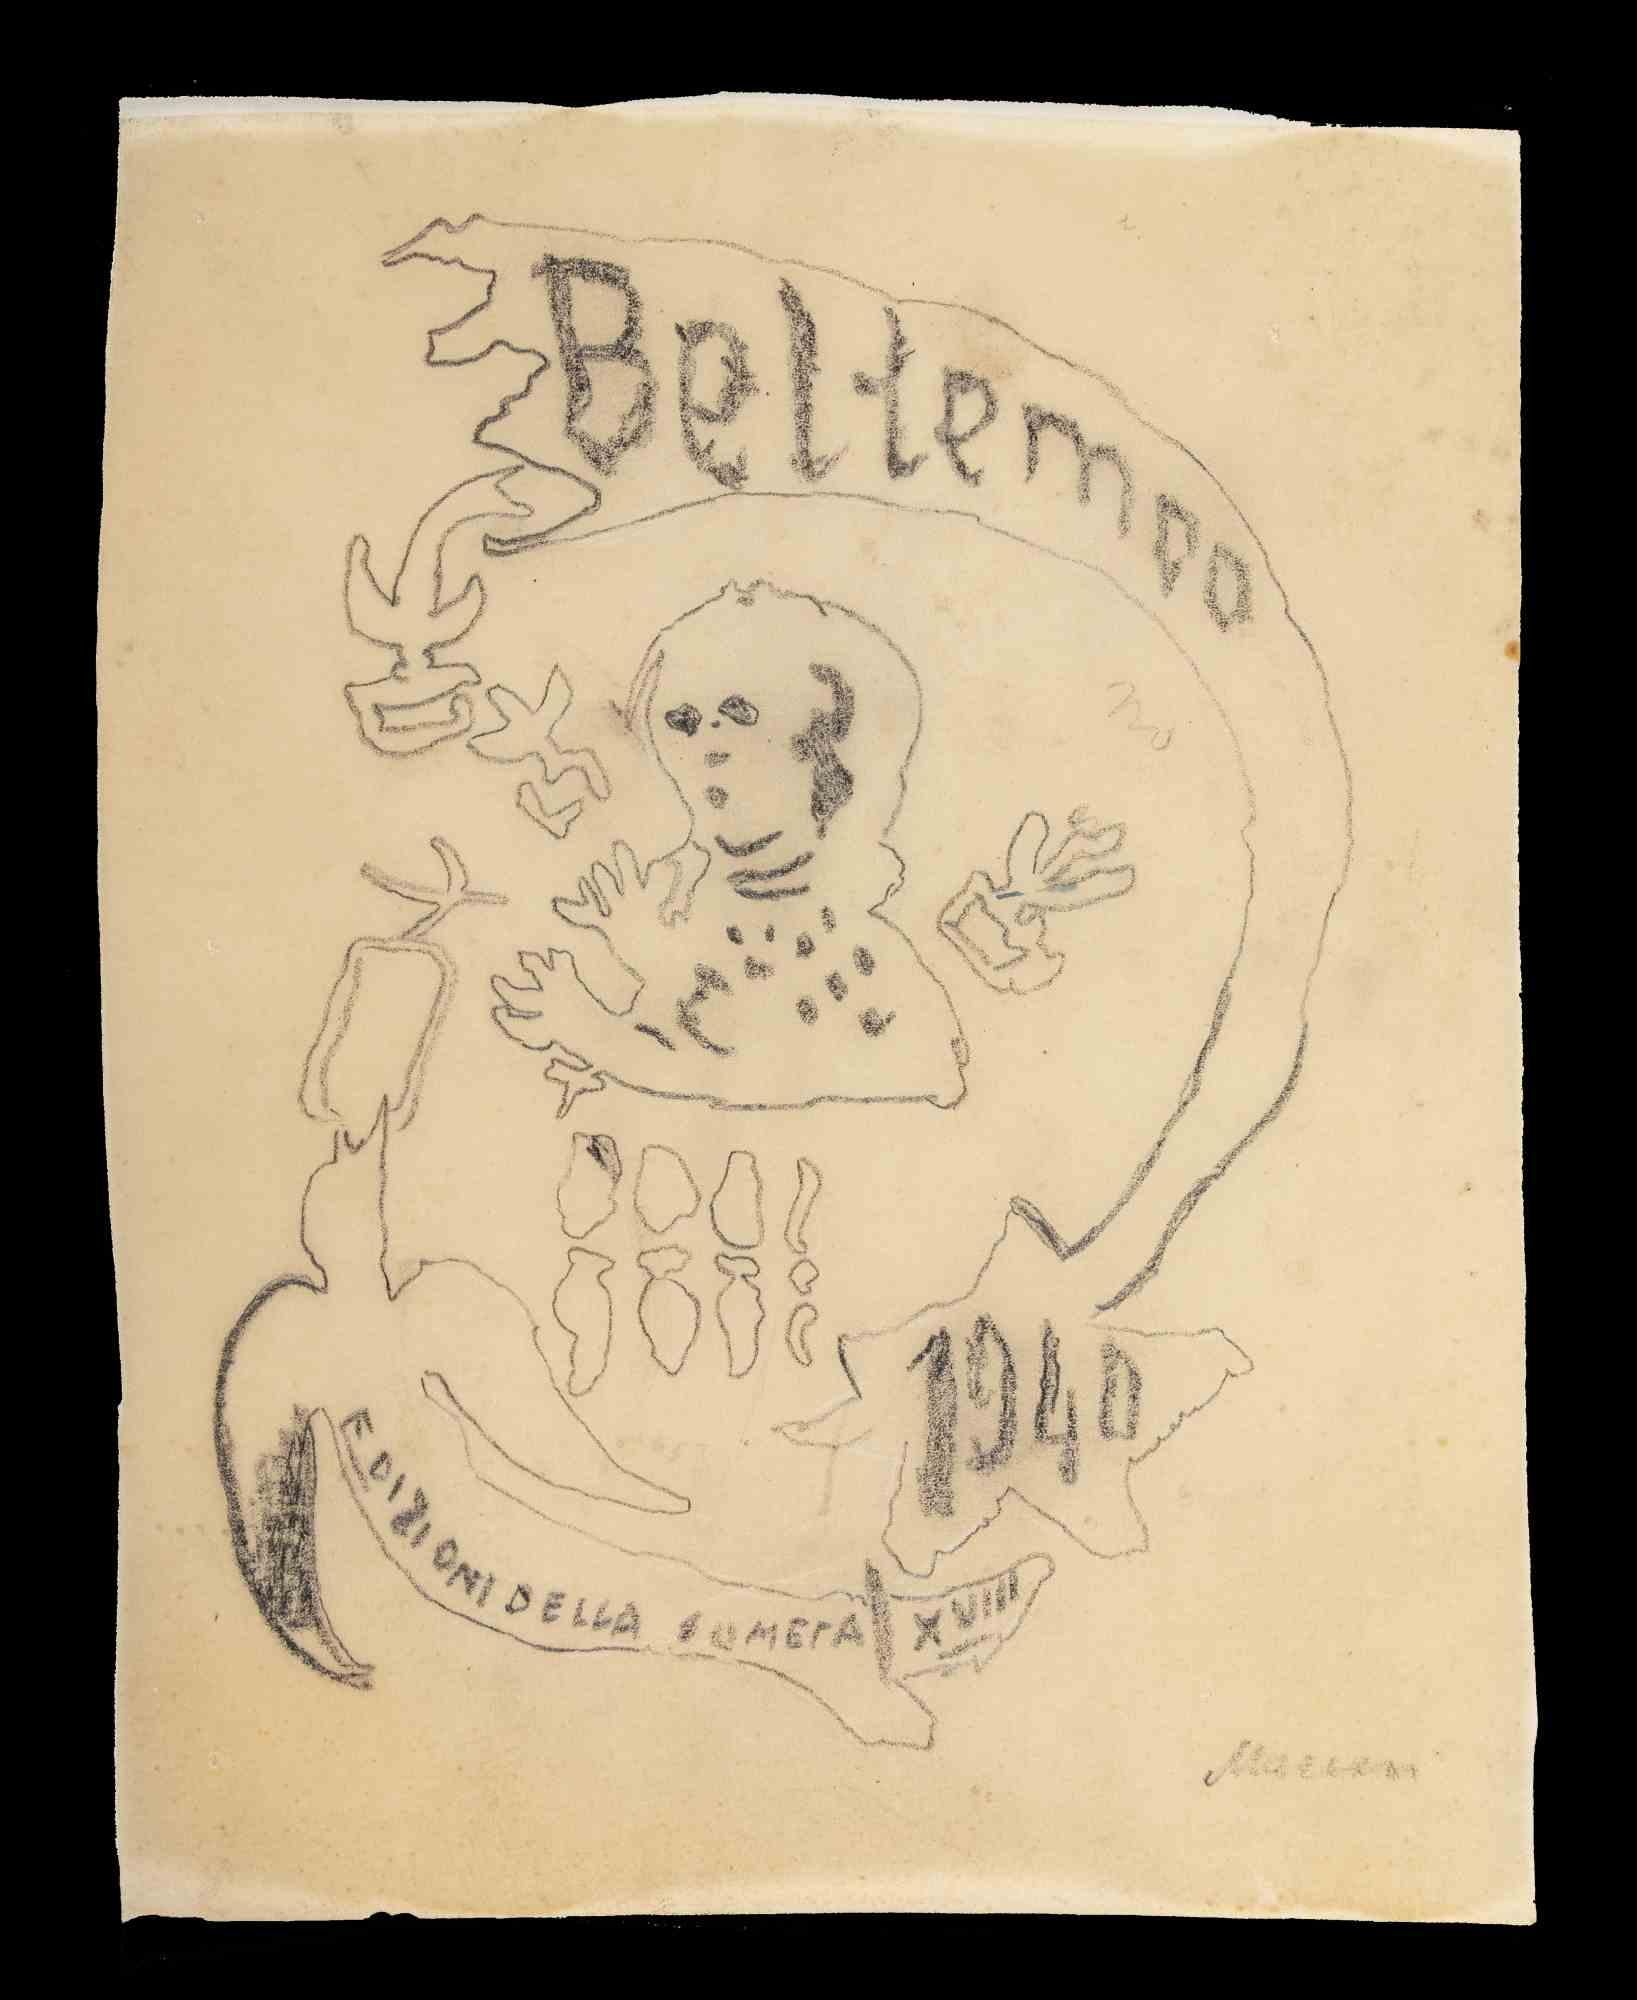 Beltempo (Good Time)  is a Pencil Drawing realized by Mino Maccari  (1924-1989) in 1940s.

Hand-signed on the lower margin.

Good condition on a little paper, artist proof for the cover of the magazine "Beltempo".

Mino Maccari (Siena, 1924-Rome,